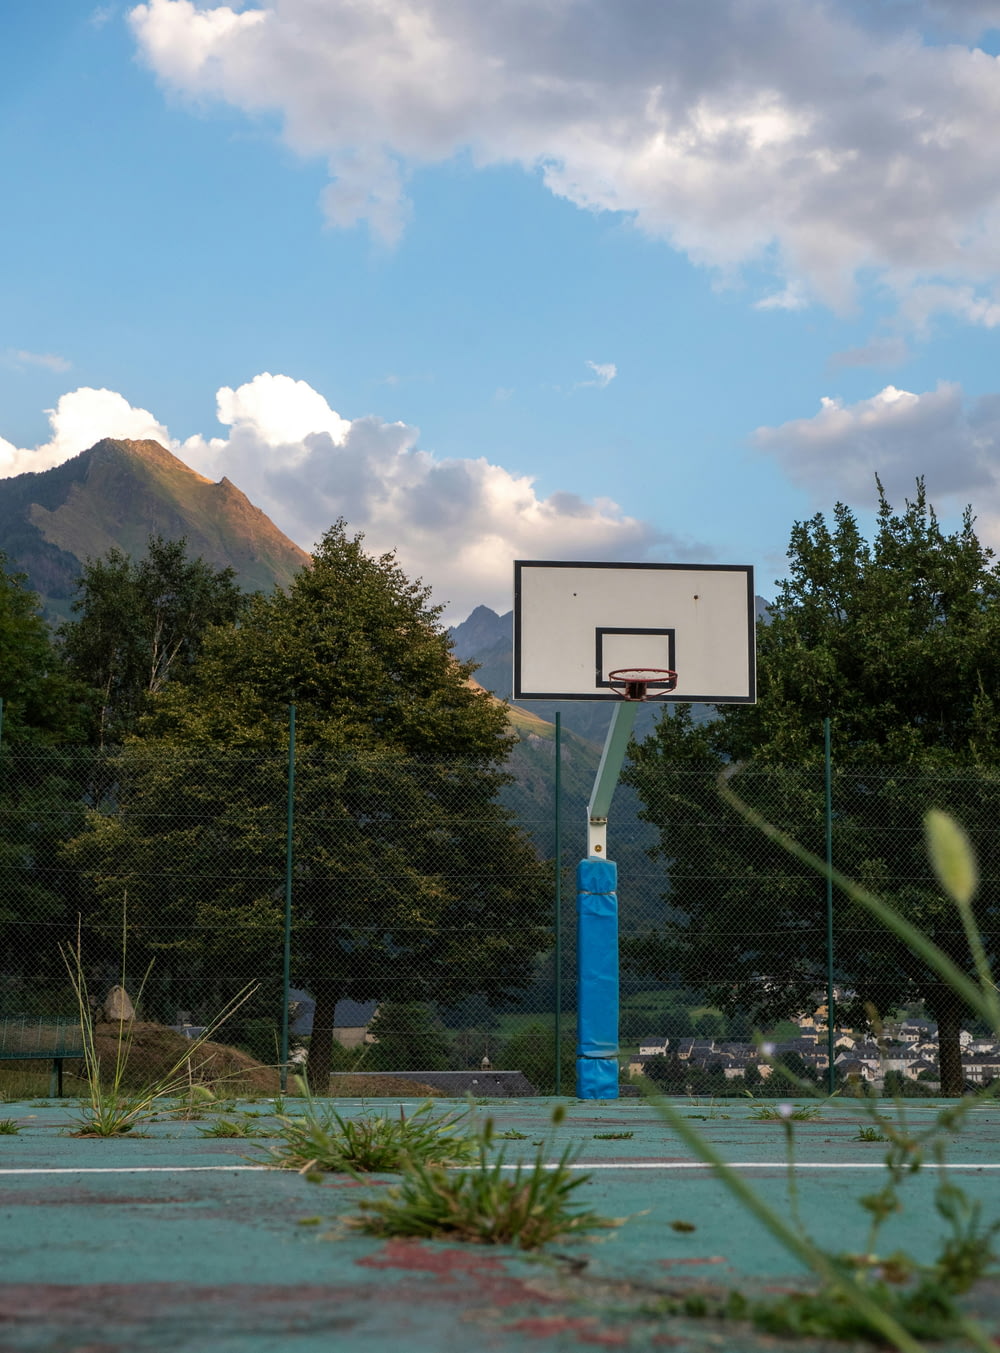 a basketball court with a basket in the middle of it